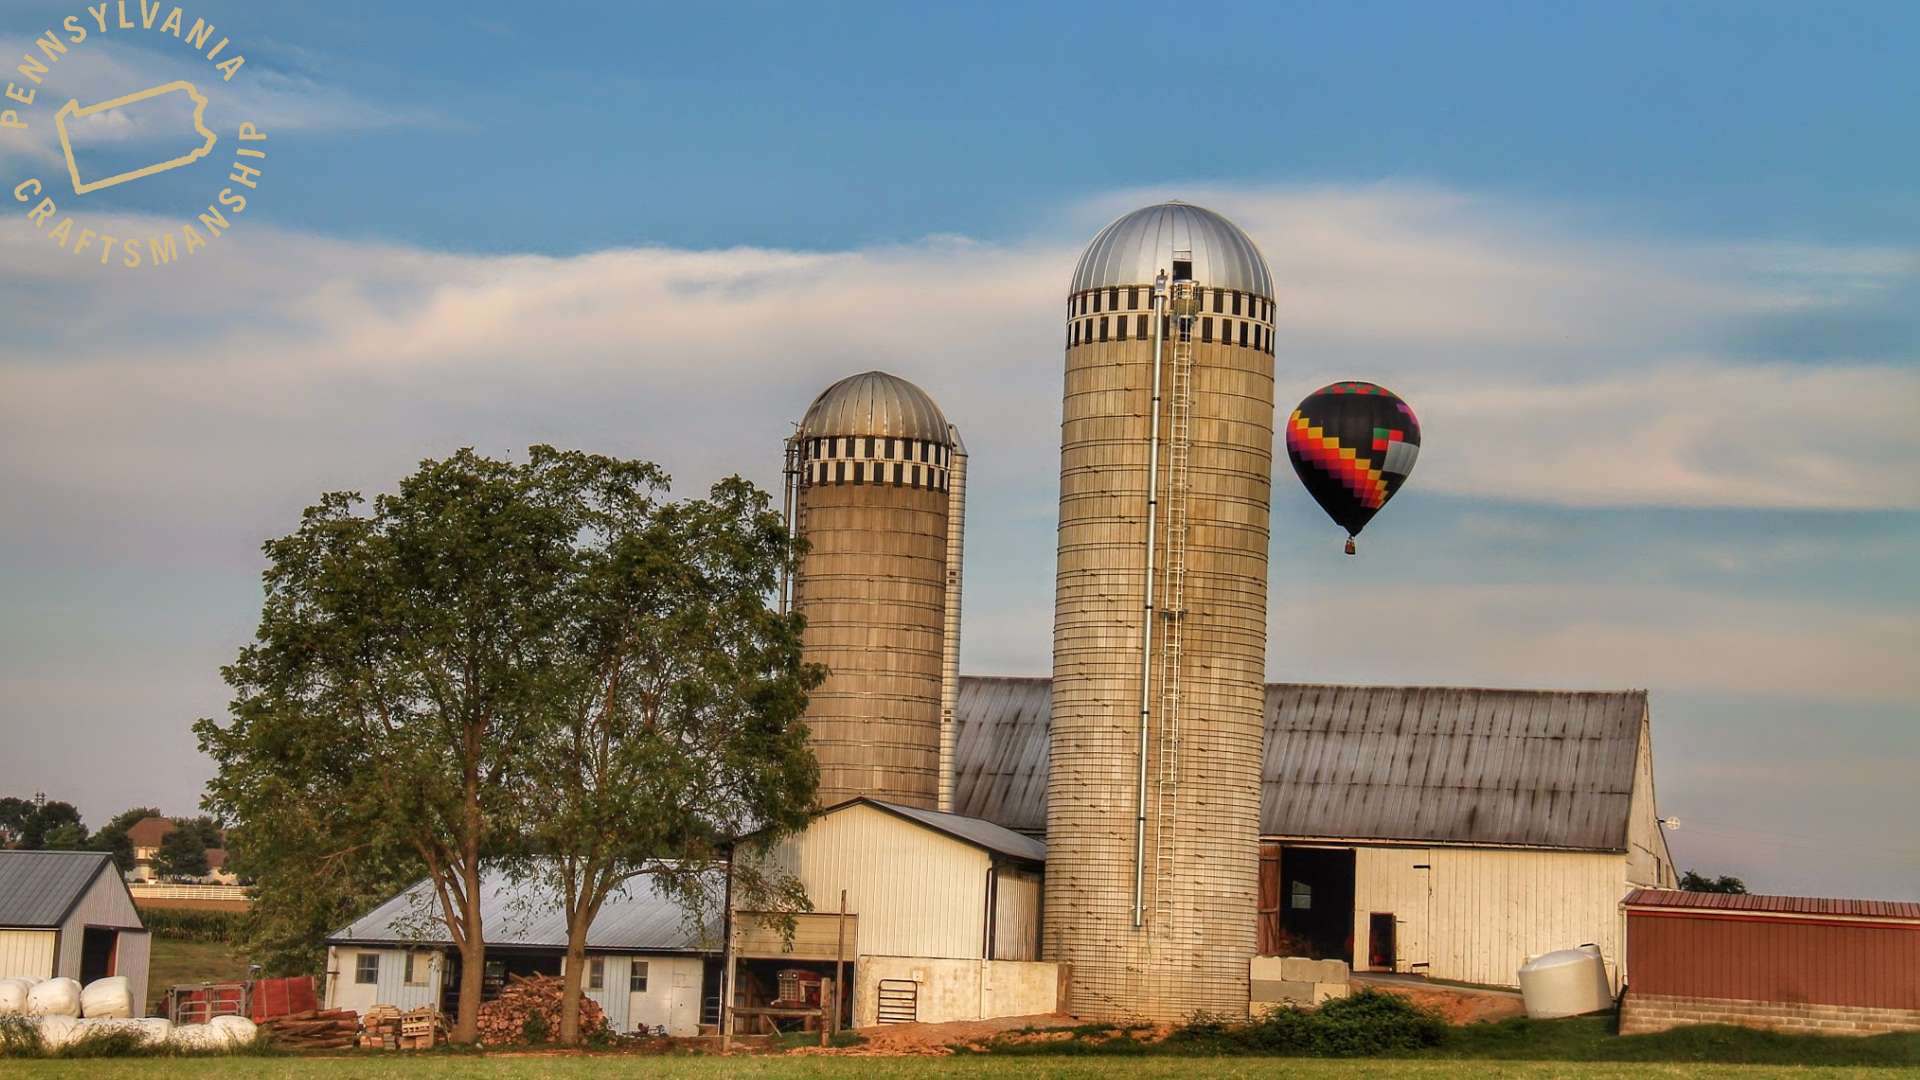 Up, Up, and Away: The Lancaster Balloon Festival Takes Flight! - snyders.furniture